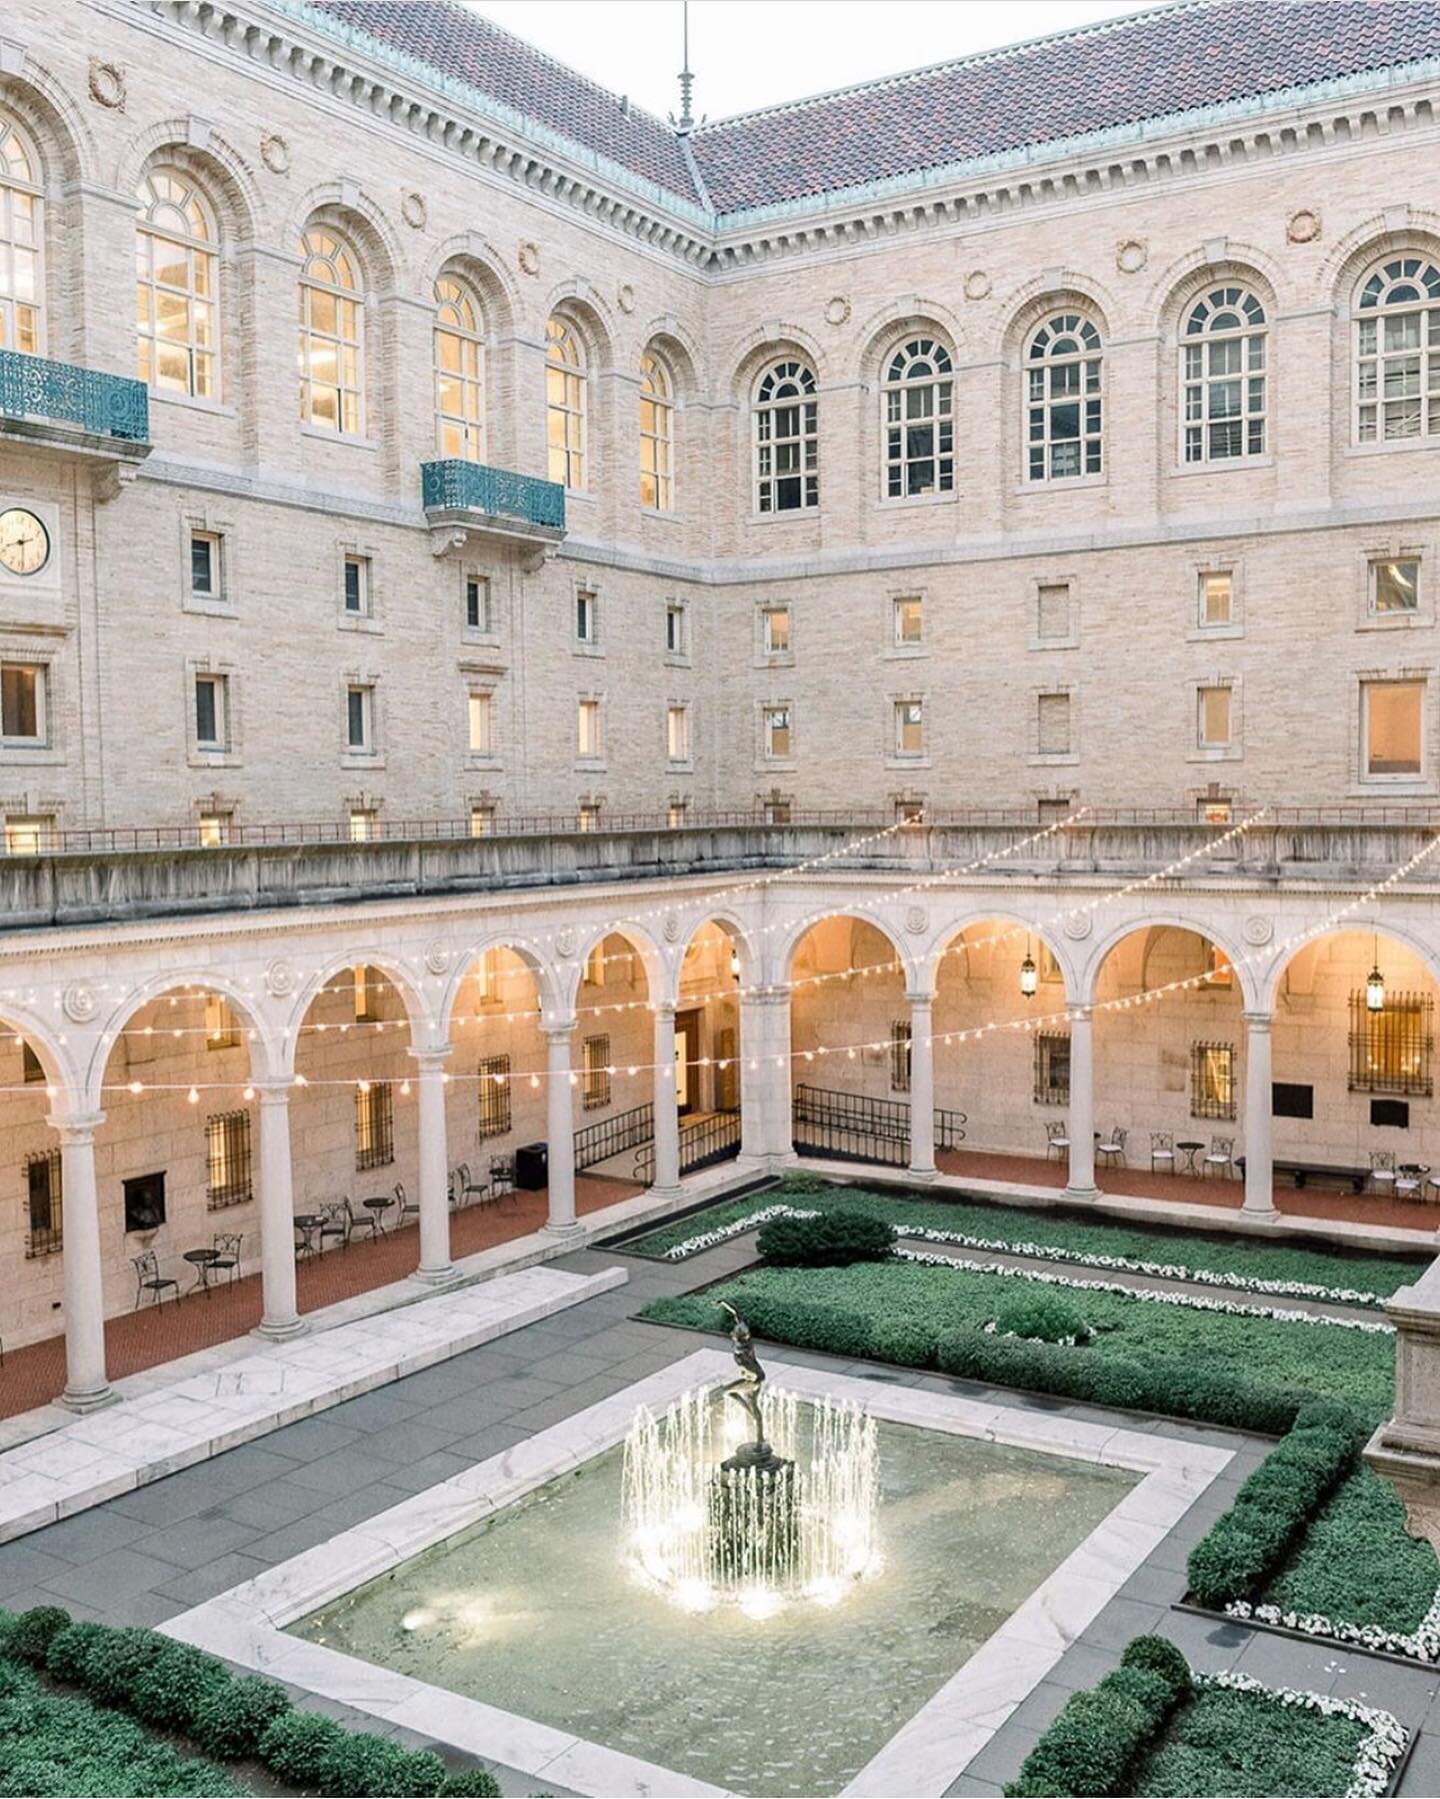 is this from a dream or is it the Boston Public Library for a beautiful wedding weekend?! #lesfleurswed 📸 : @michellelangephoto 
Photography by @michellelangephoto
Planning + Design: @alwaysyoursevents
Catering + Venue: @thecateredaffair and @bplbos